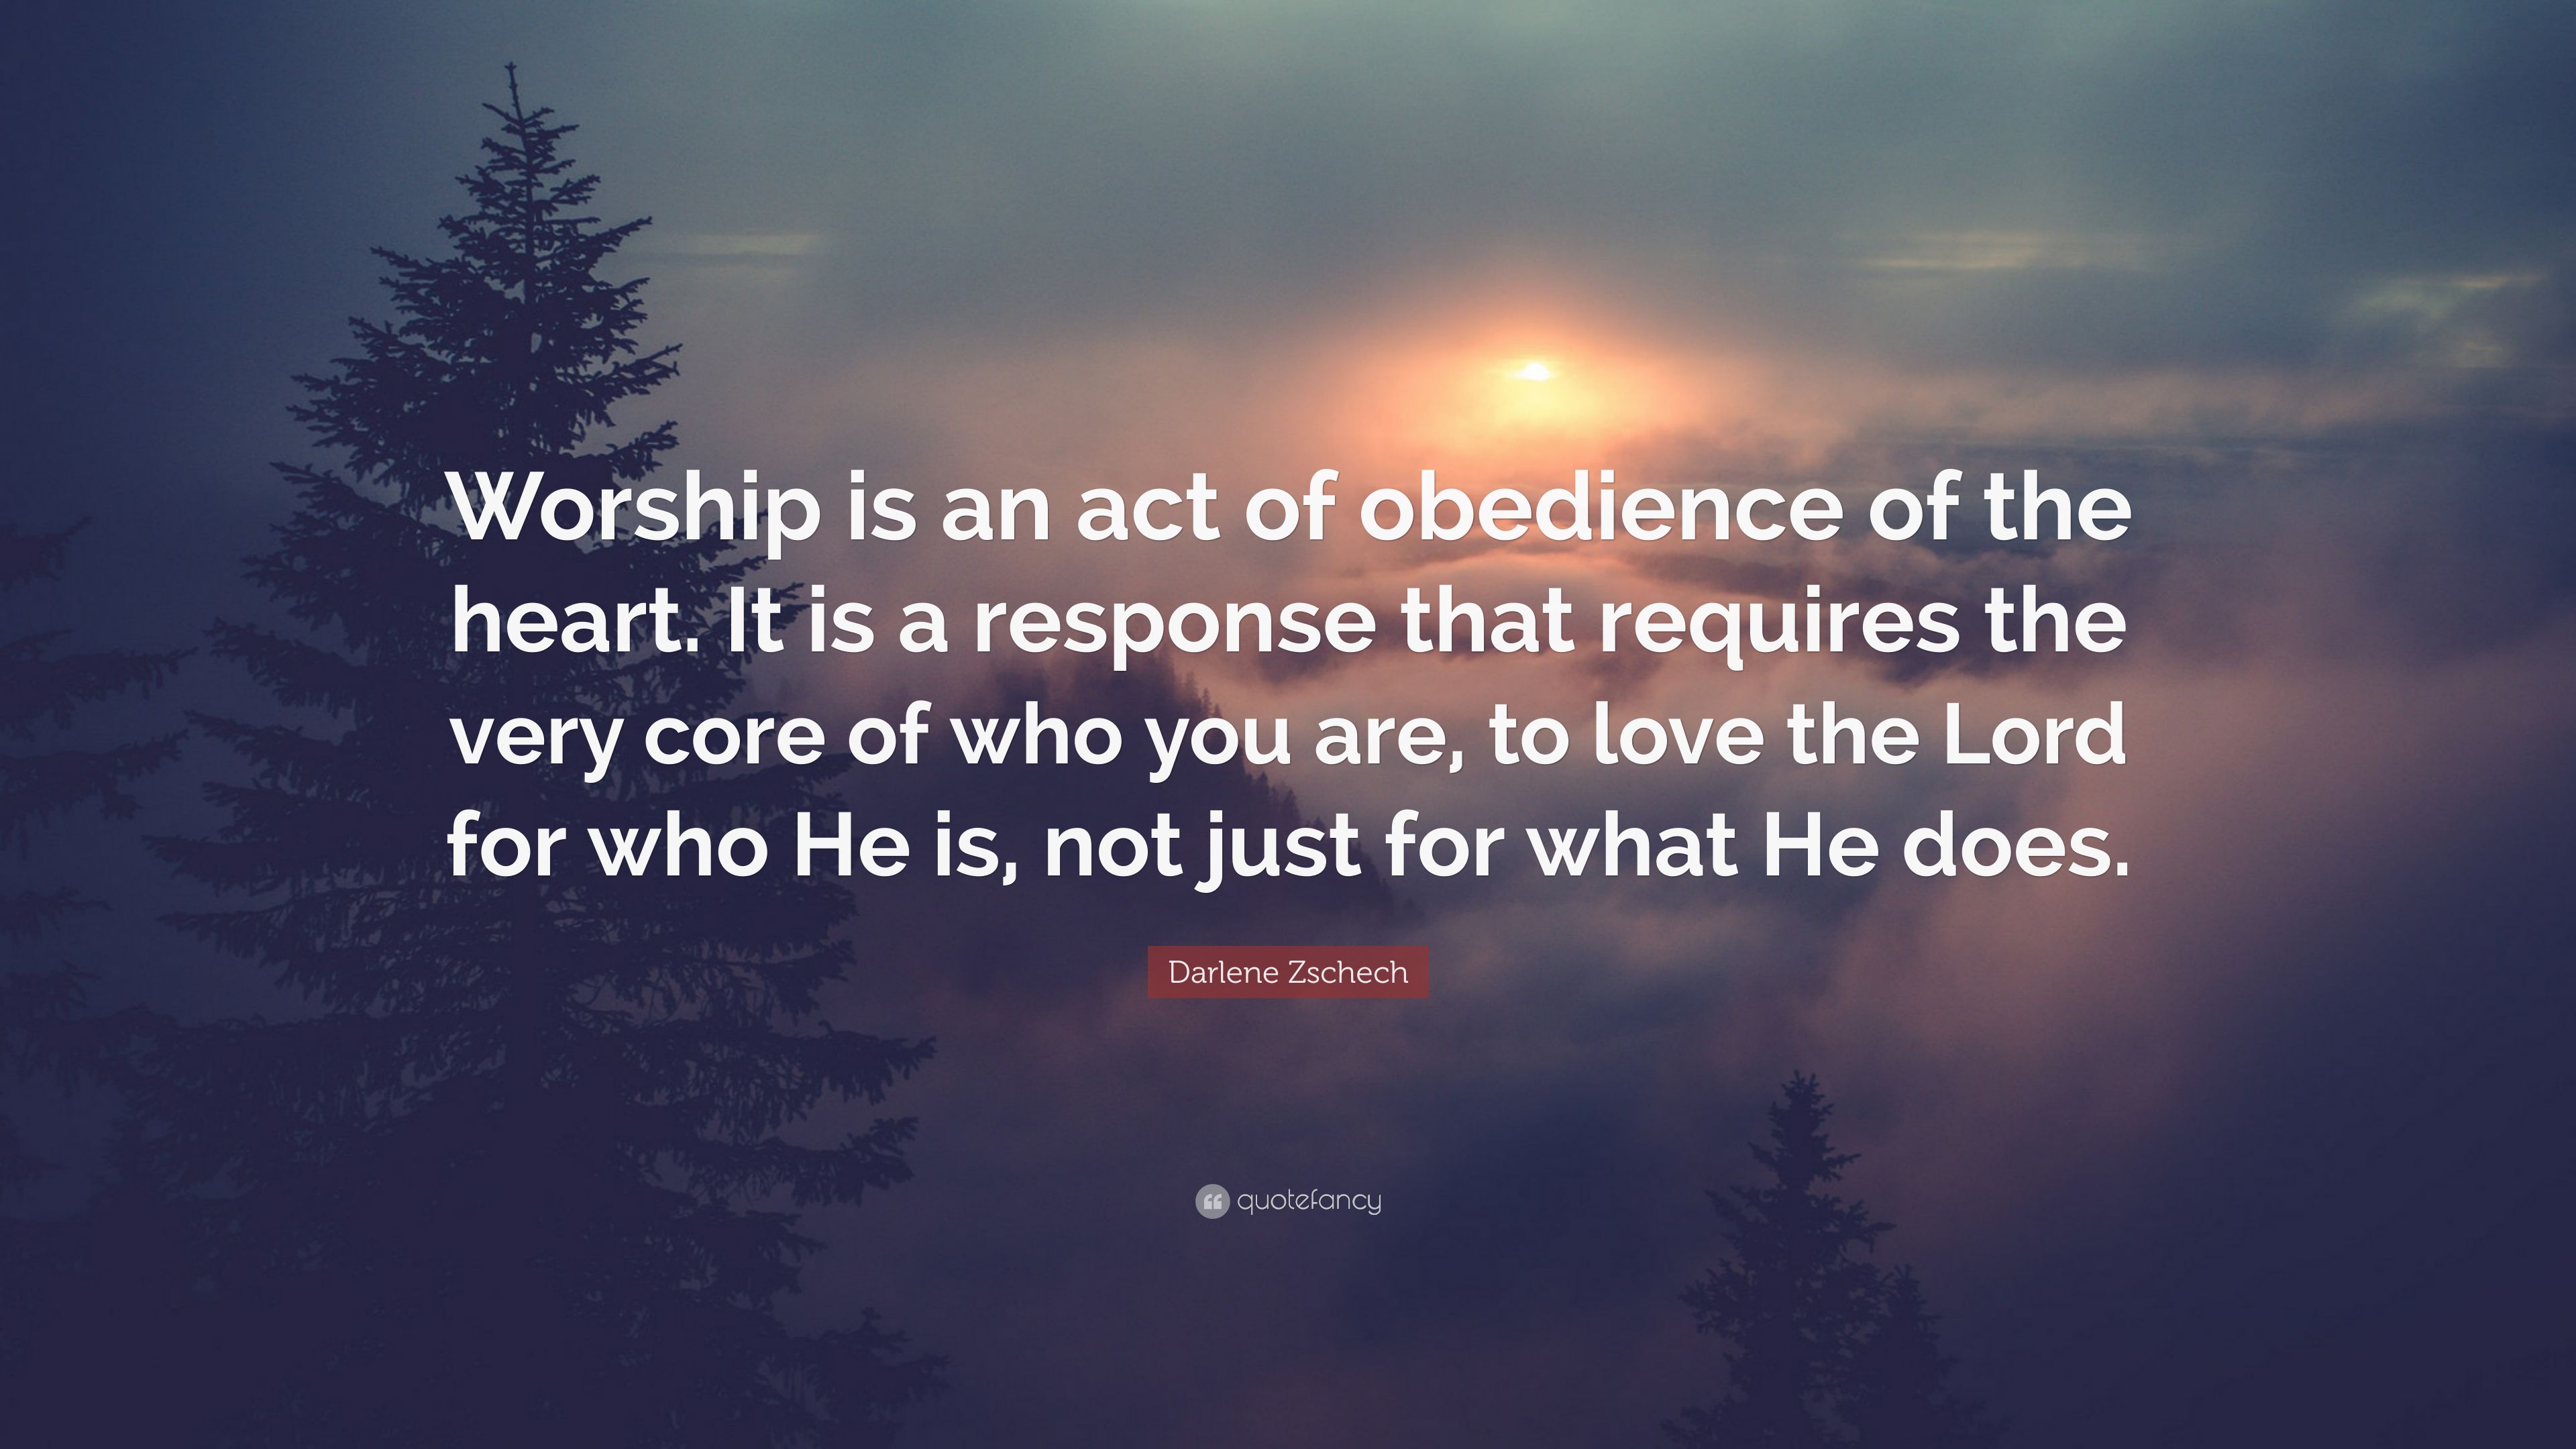 Darlene Zschech Quote: “Worship is an act of obedience